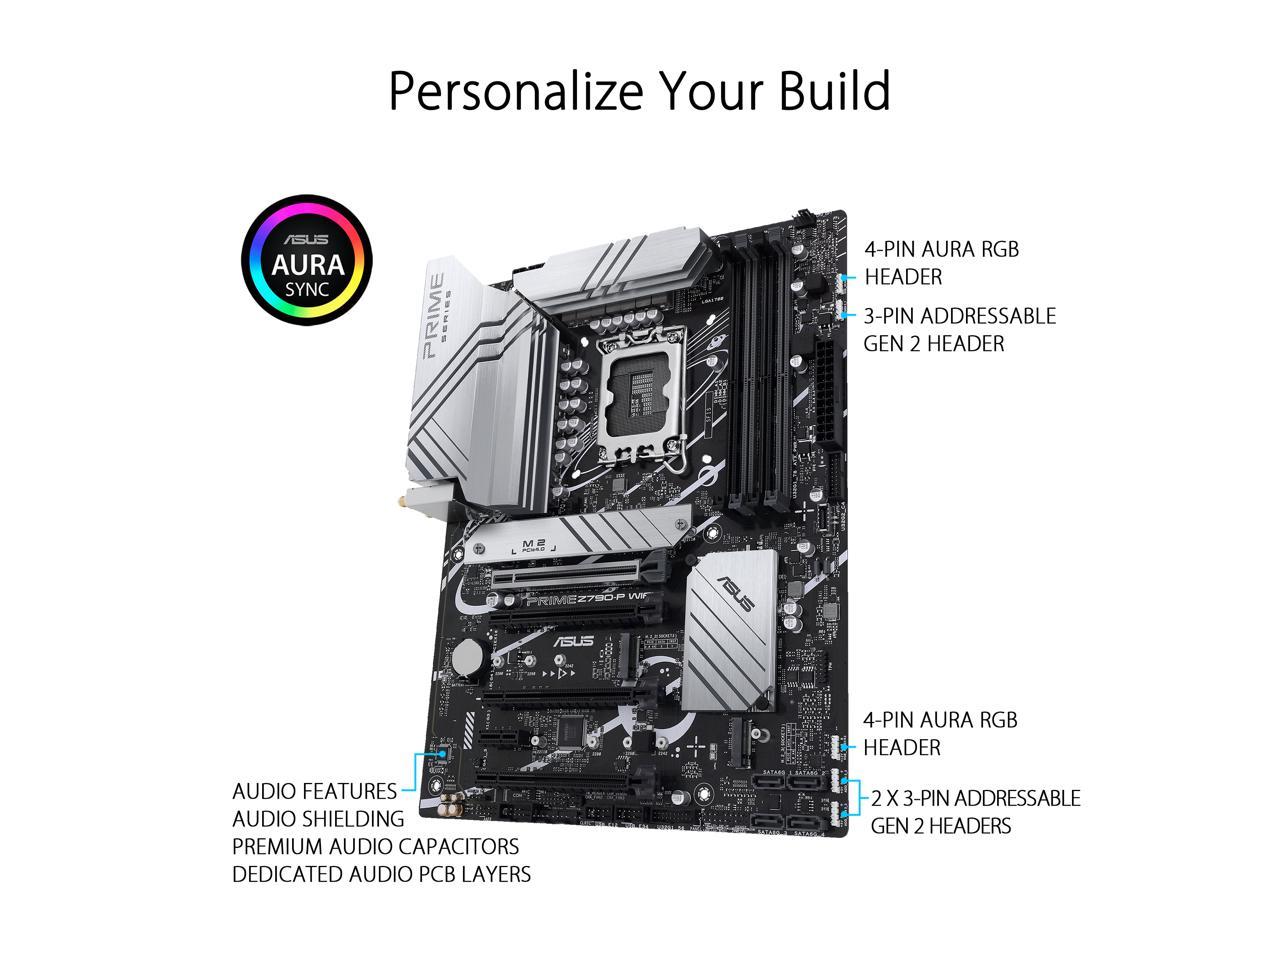 ASUS Prime Z790-P WiFi LGA 1700 (Intel 13th&12th Gen) ATX Motherboard (PCIe 5.0, DDR5, 14+1 Power Stages, 3x M.2, WiFi 6, Bluetooth v5.2, 2.5Gb LAN, Front Panel USB 3.2 Gen 2 Type-C, Thunderbolt 4 (USB4) Support, Arua Sync)